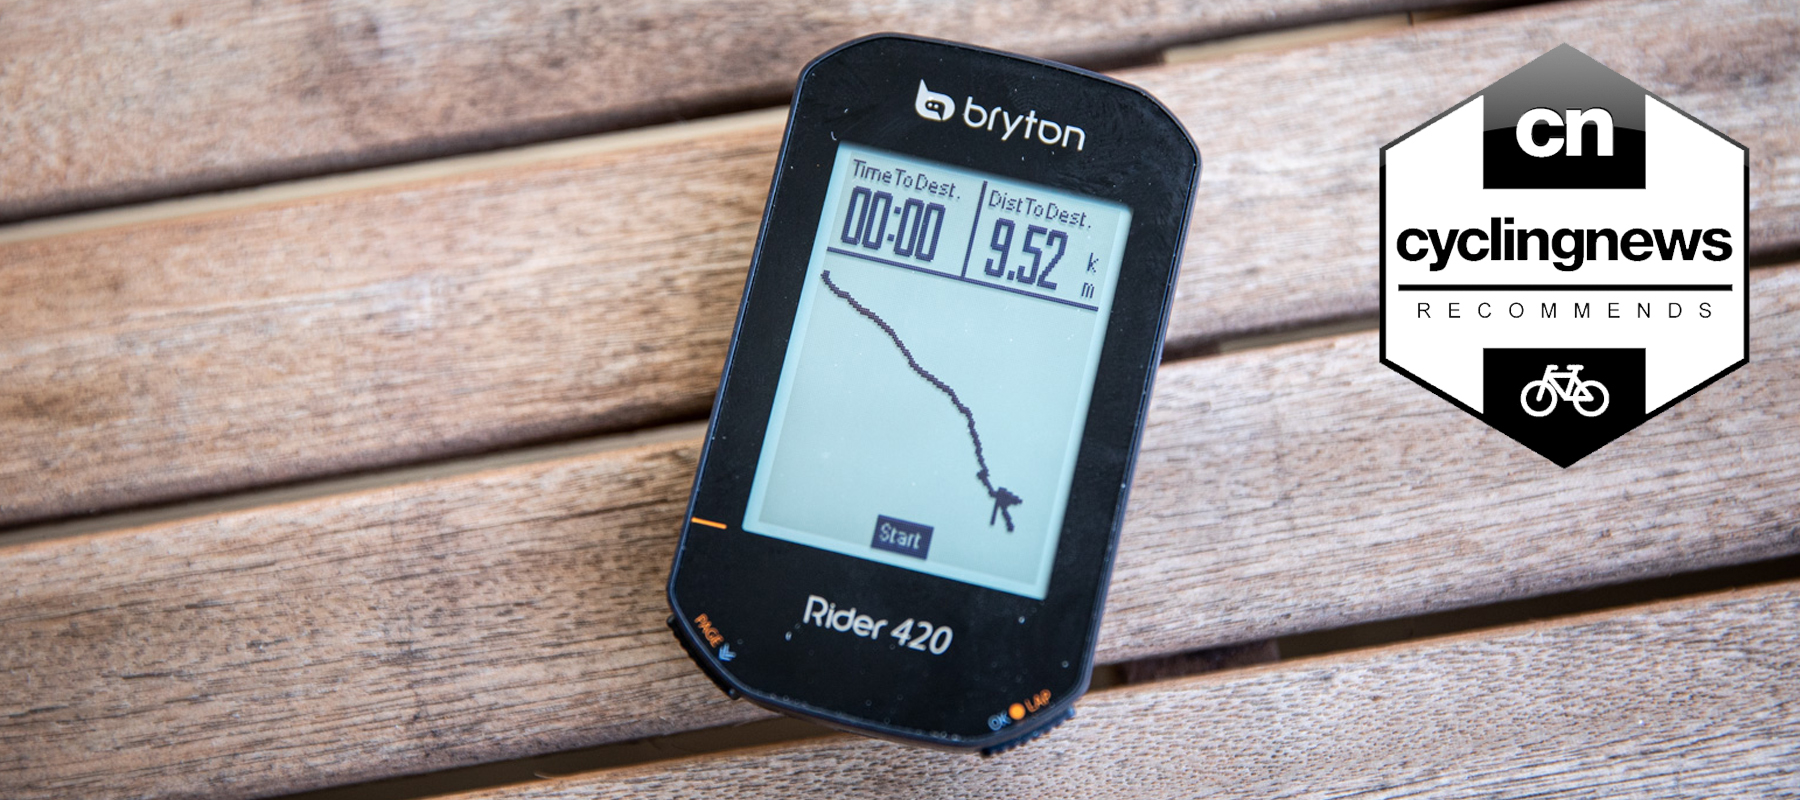 Cadence+HRM sensors Bundle 5 Satellites Systems Support for Extreme Accuracy. 35hrs Long Battery Life Bread-Crumb Trail with Turn-by Turn Follow Track Bryton Rider 420T GPS Cycling Bike Computer 